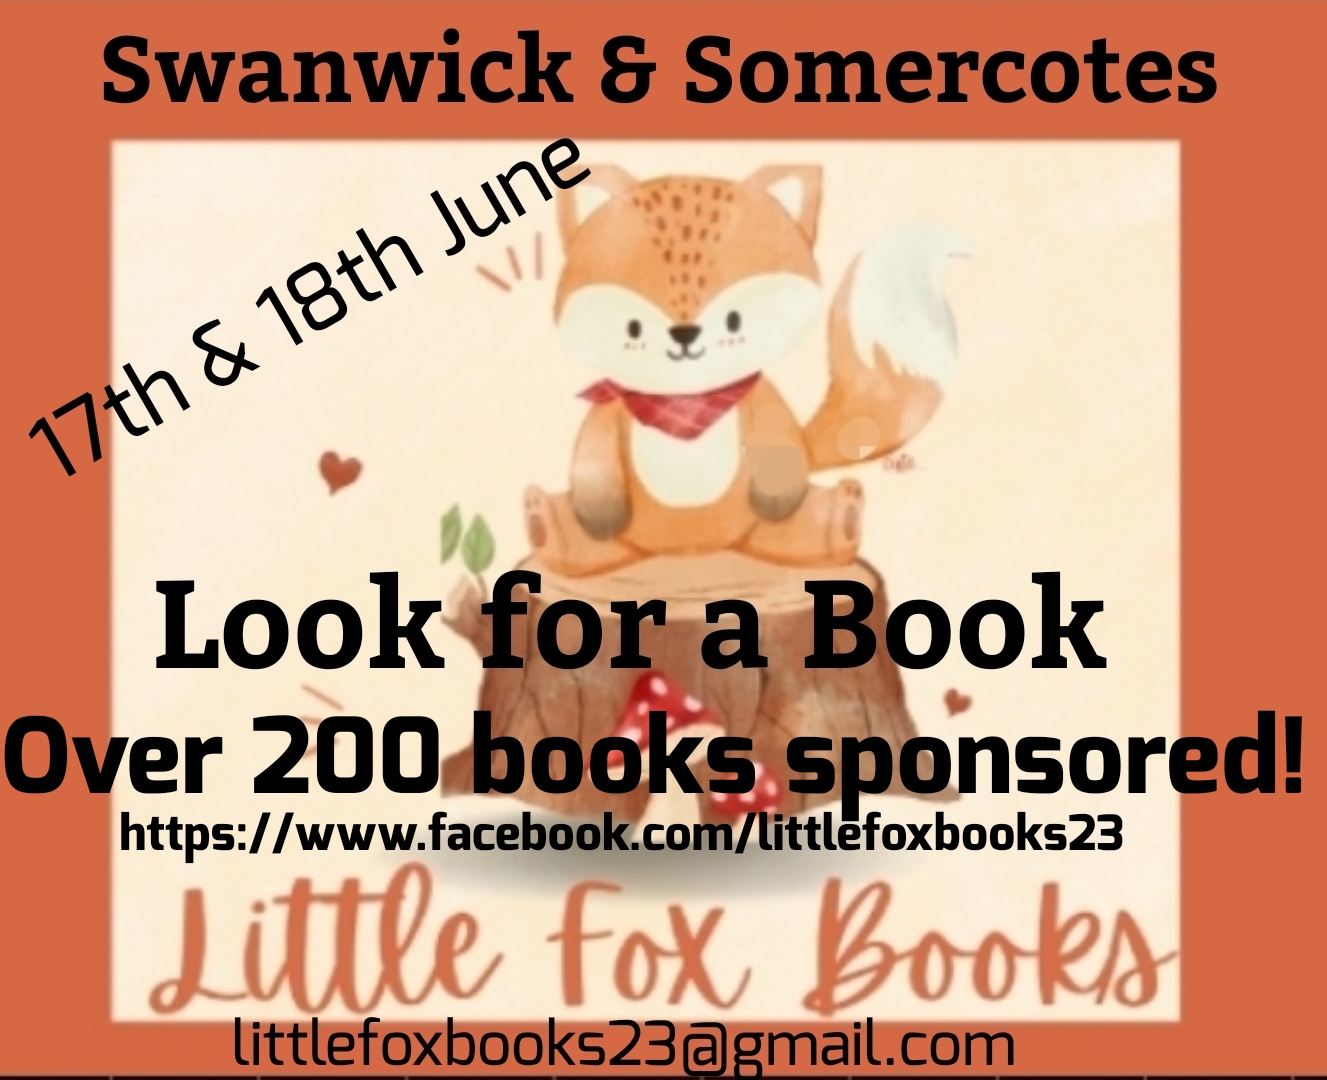 A community book hunt will take place in Swanwick and Somercotes in June